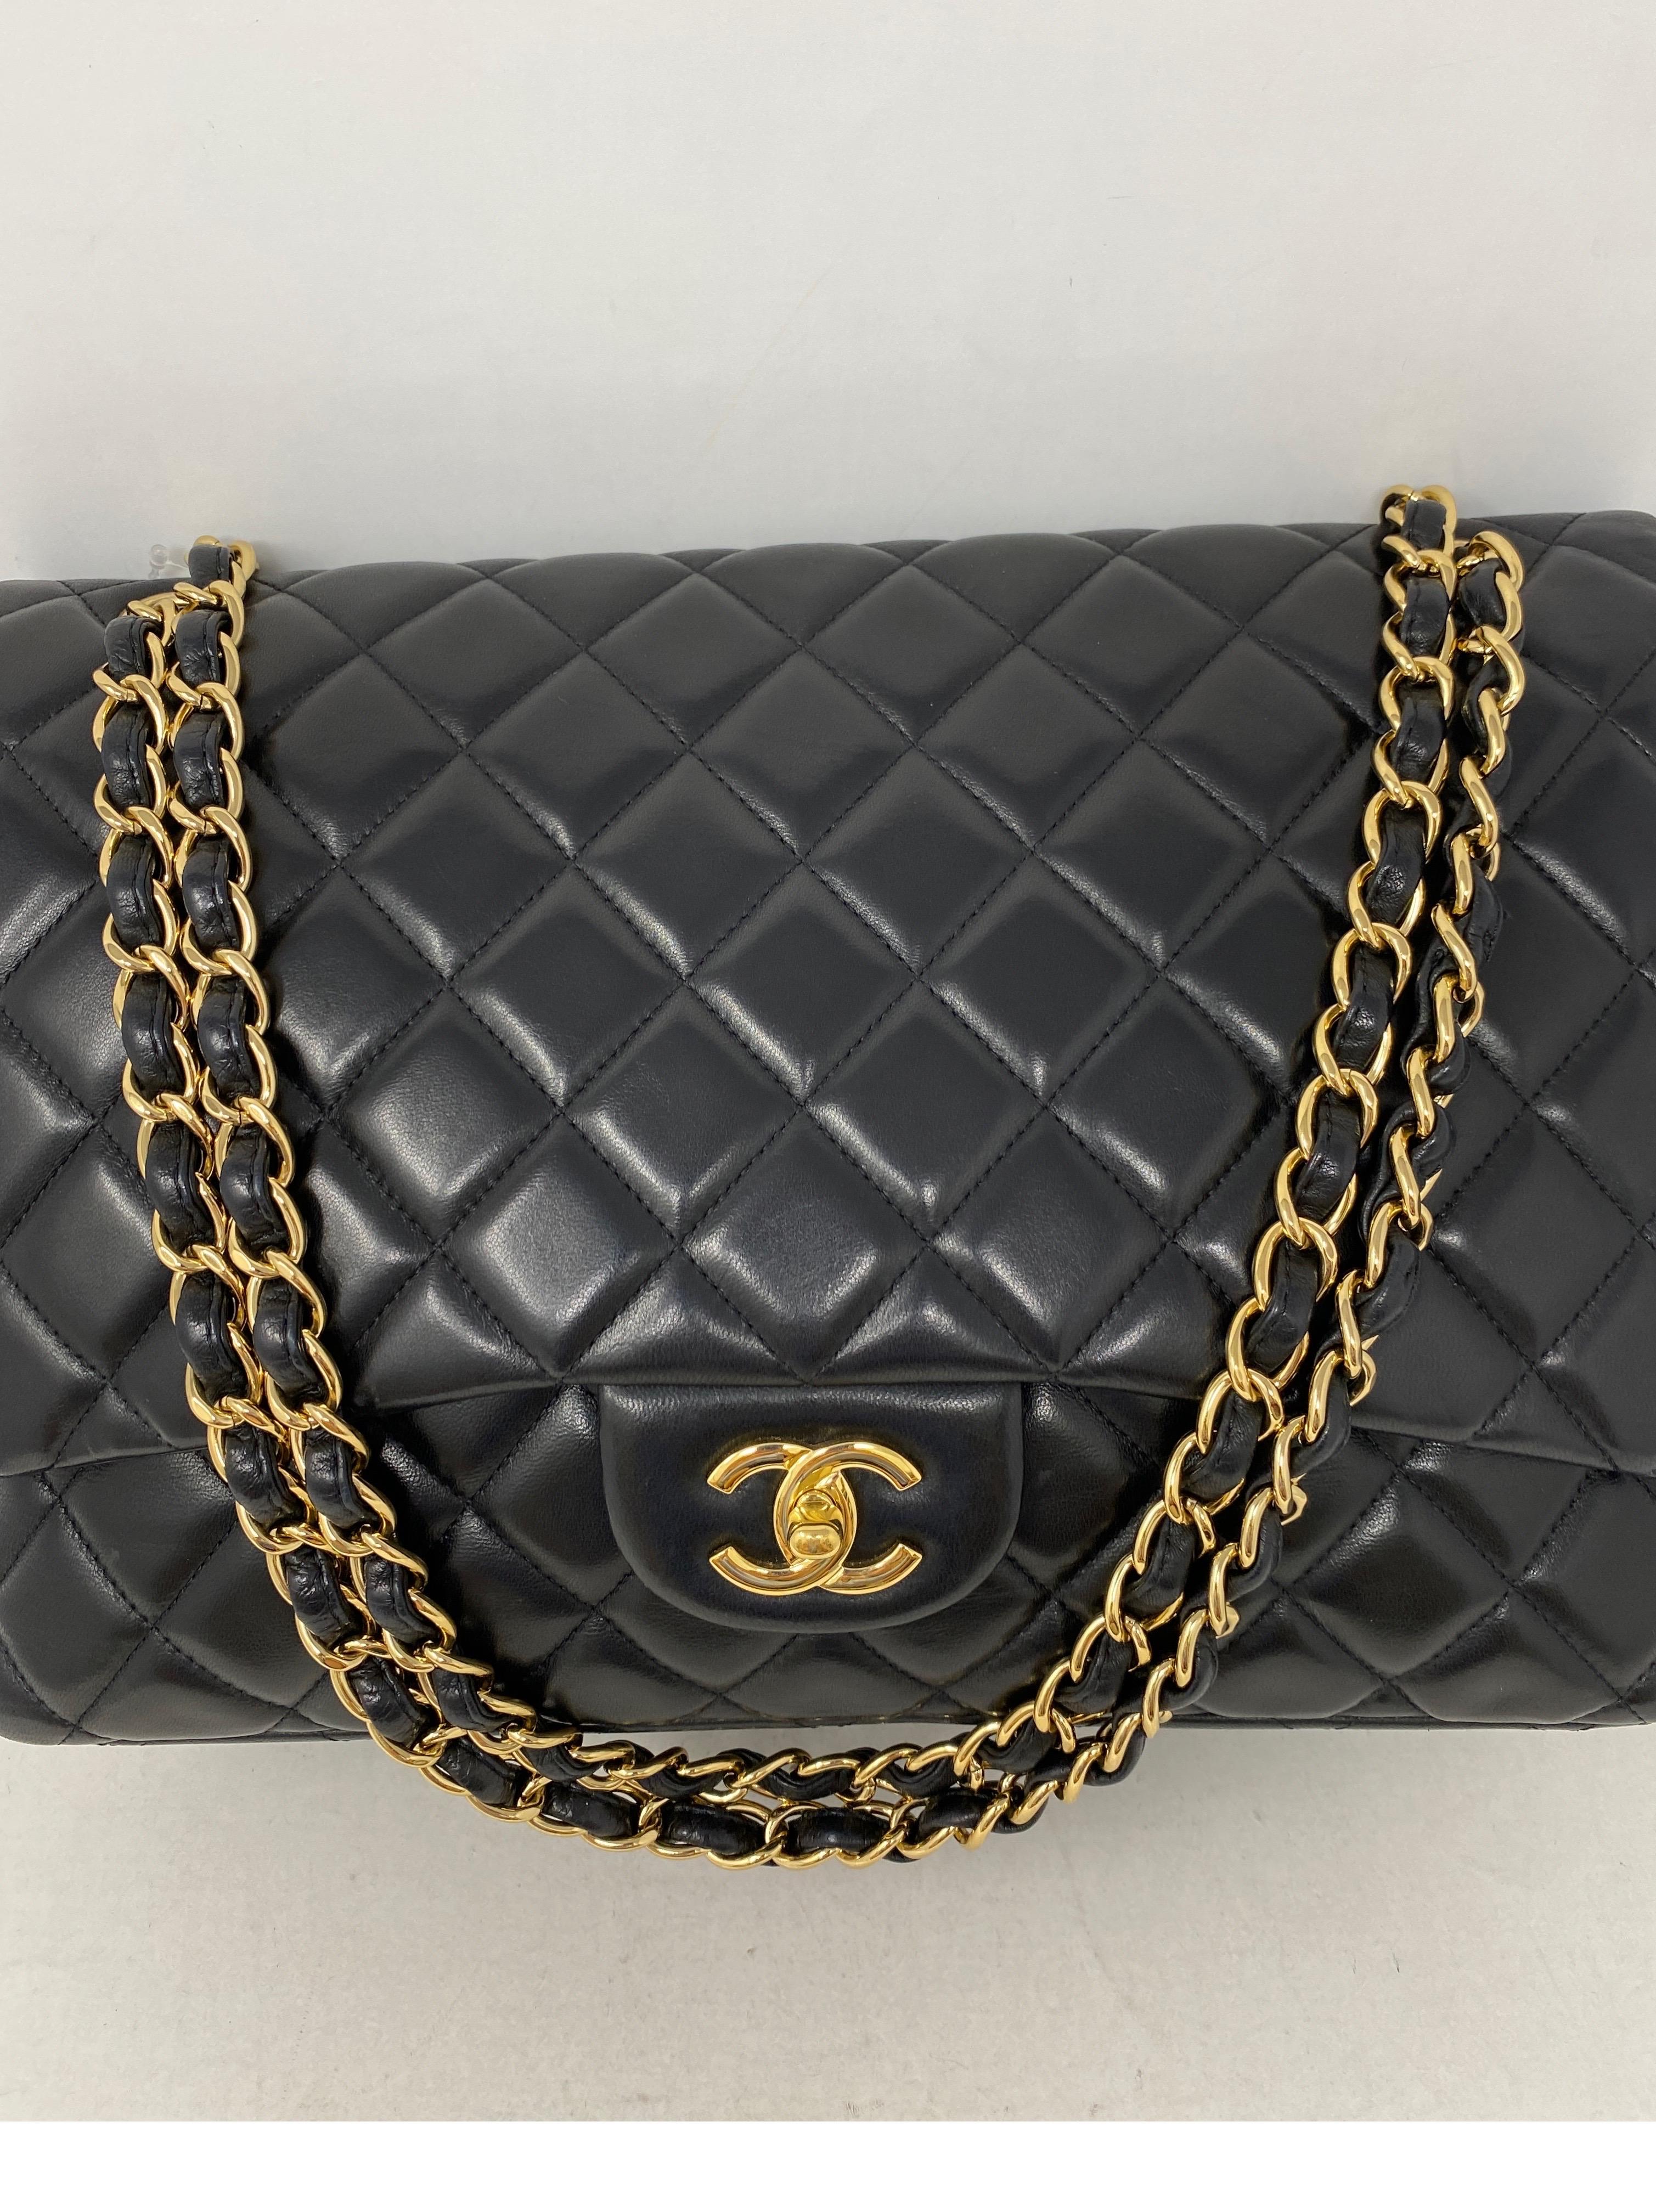 Chanel Black Maxi Lambskin Single Flap Bag. Gold hardware. Excellent condition. Can be worn crossbody or doubled as a shoulder bag. Interior clean. Includes authenticity card. Guaranteed authentic. 